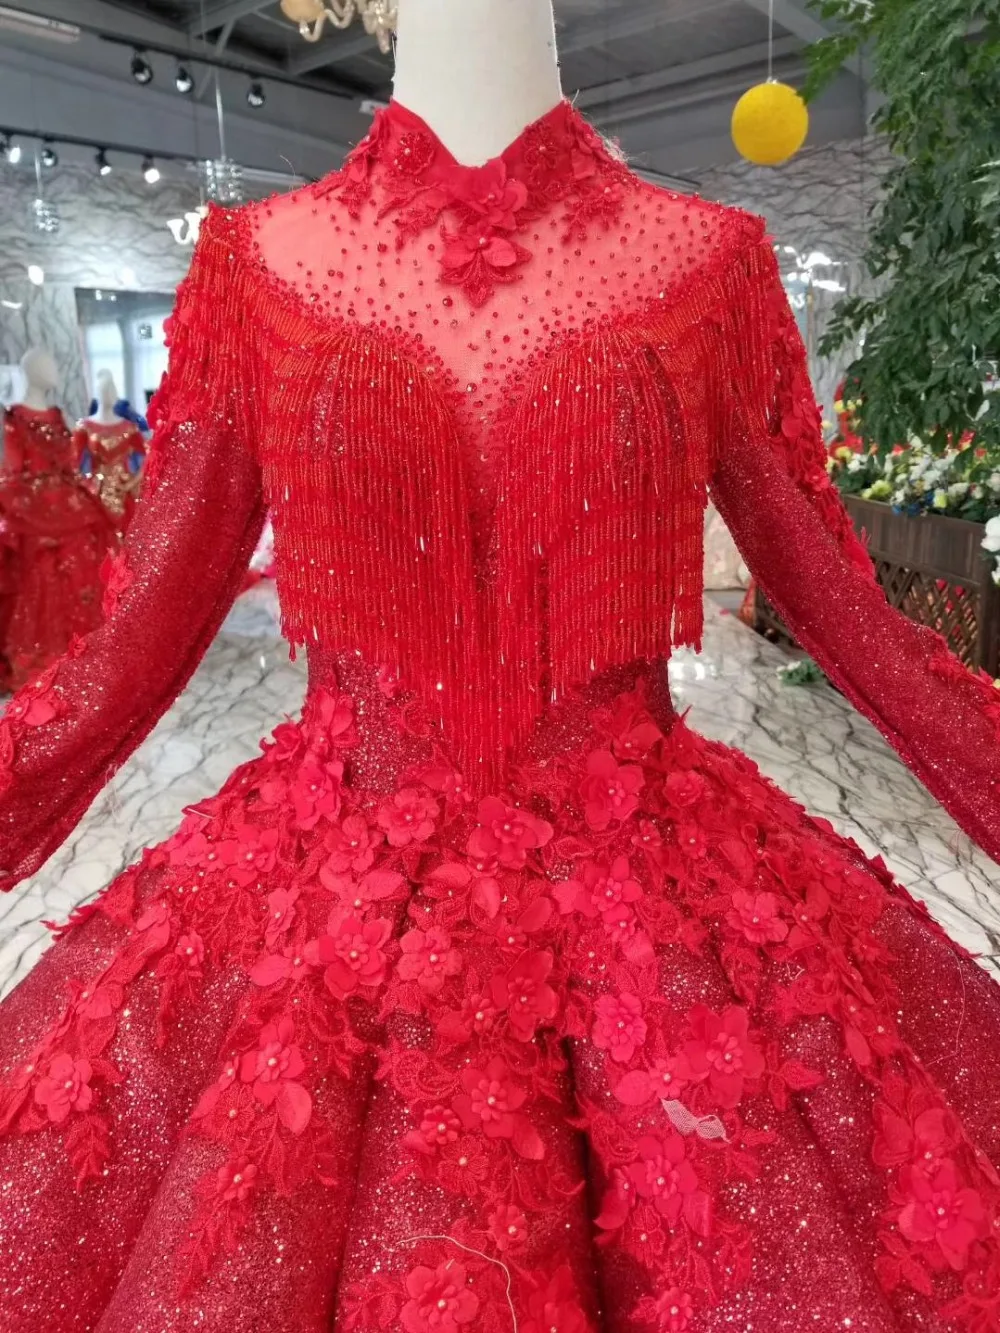 

CloverBridal new luxury tassels flowers pearls crystals glitter 2019 red wedding dress long sleeve ball gown high neck